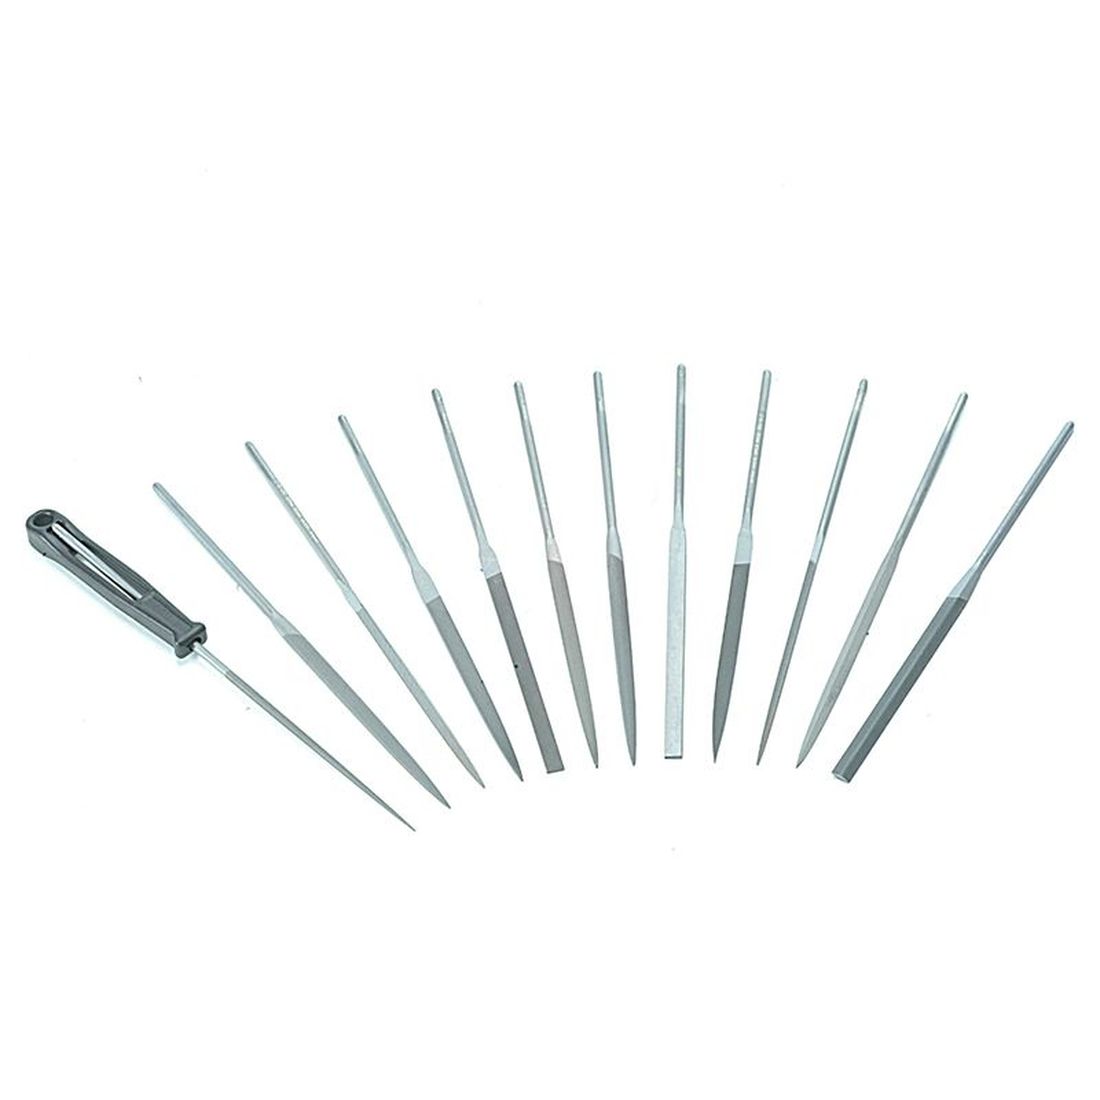 Bahco 2-472-16-2-0 Needle Set of 12 Cut 2 Smoot 160mm (6.2in)                         